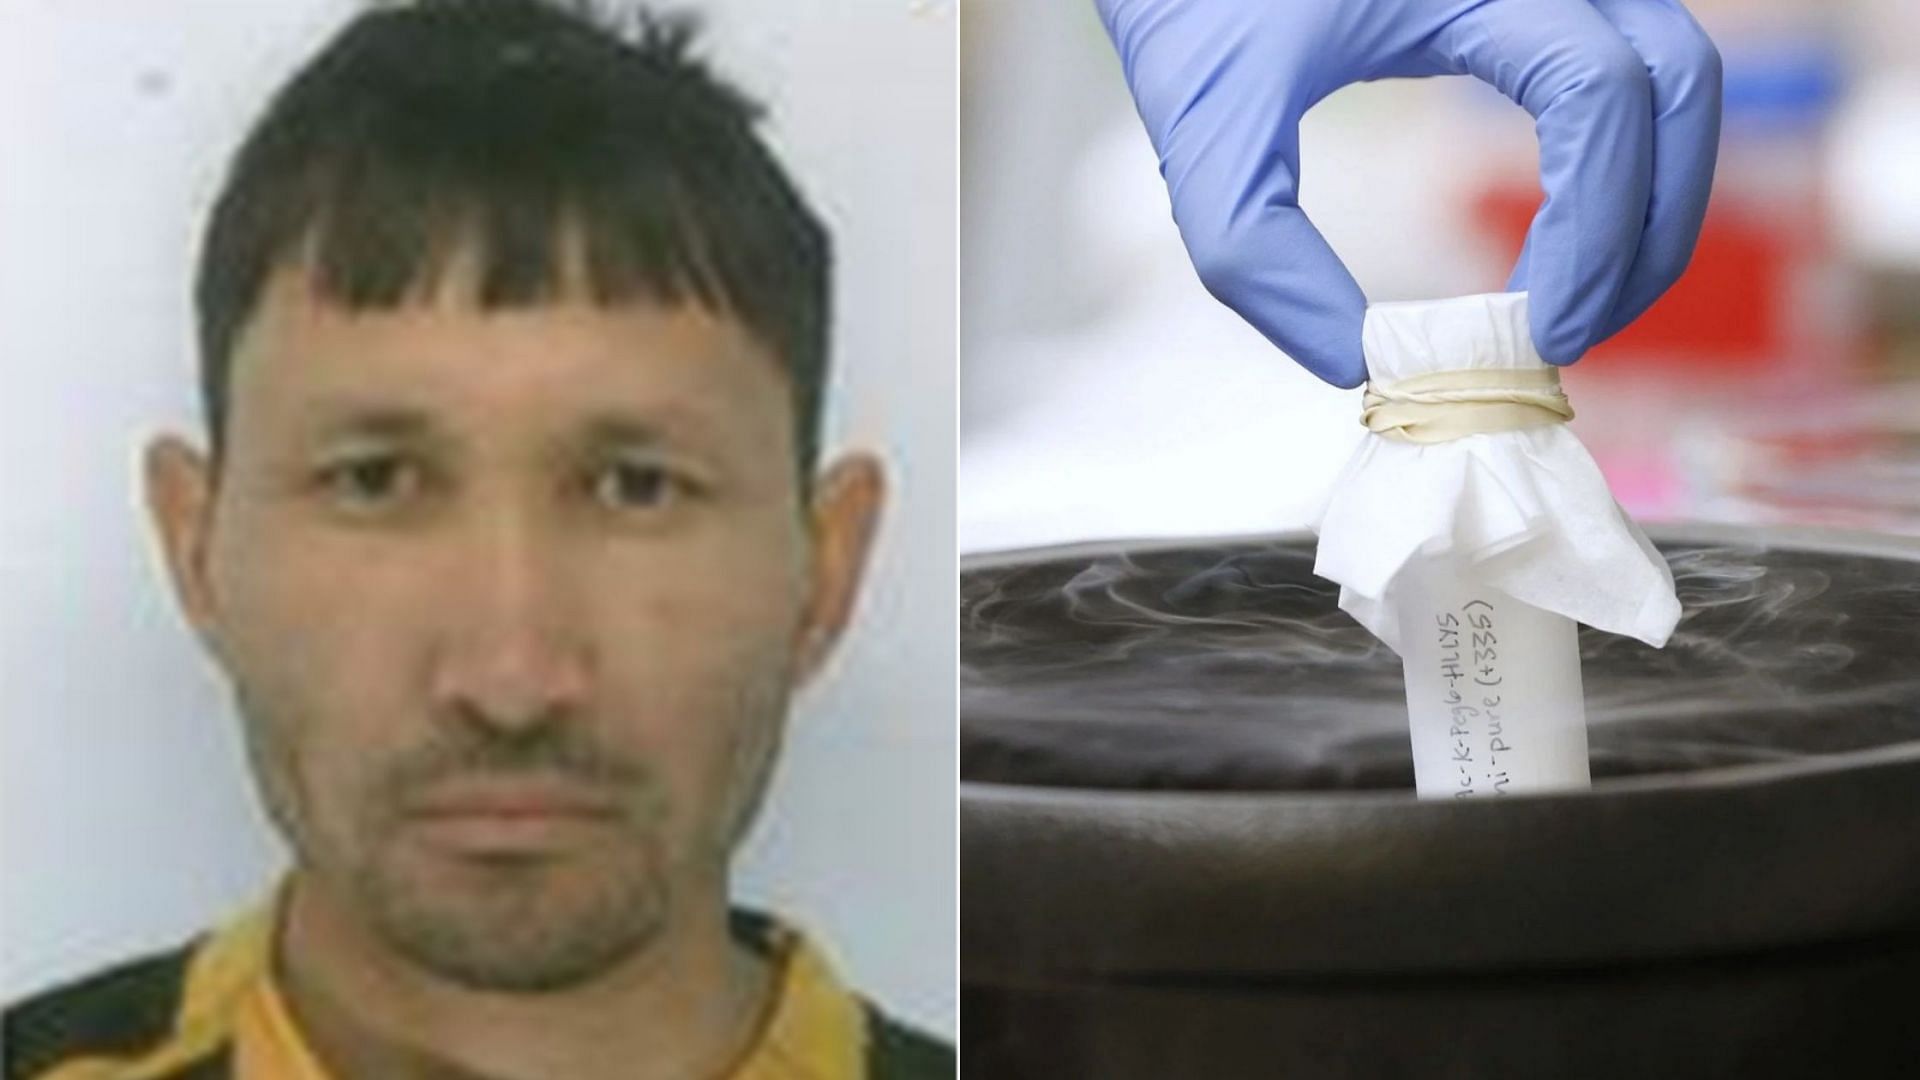 A suspect image of Abdul Shakoor Ezedi released by Met Police (R) and a representative image of acid (L) (Image via X/@LambethMPS and Getty)